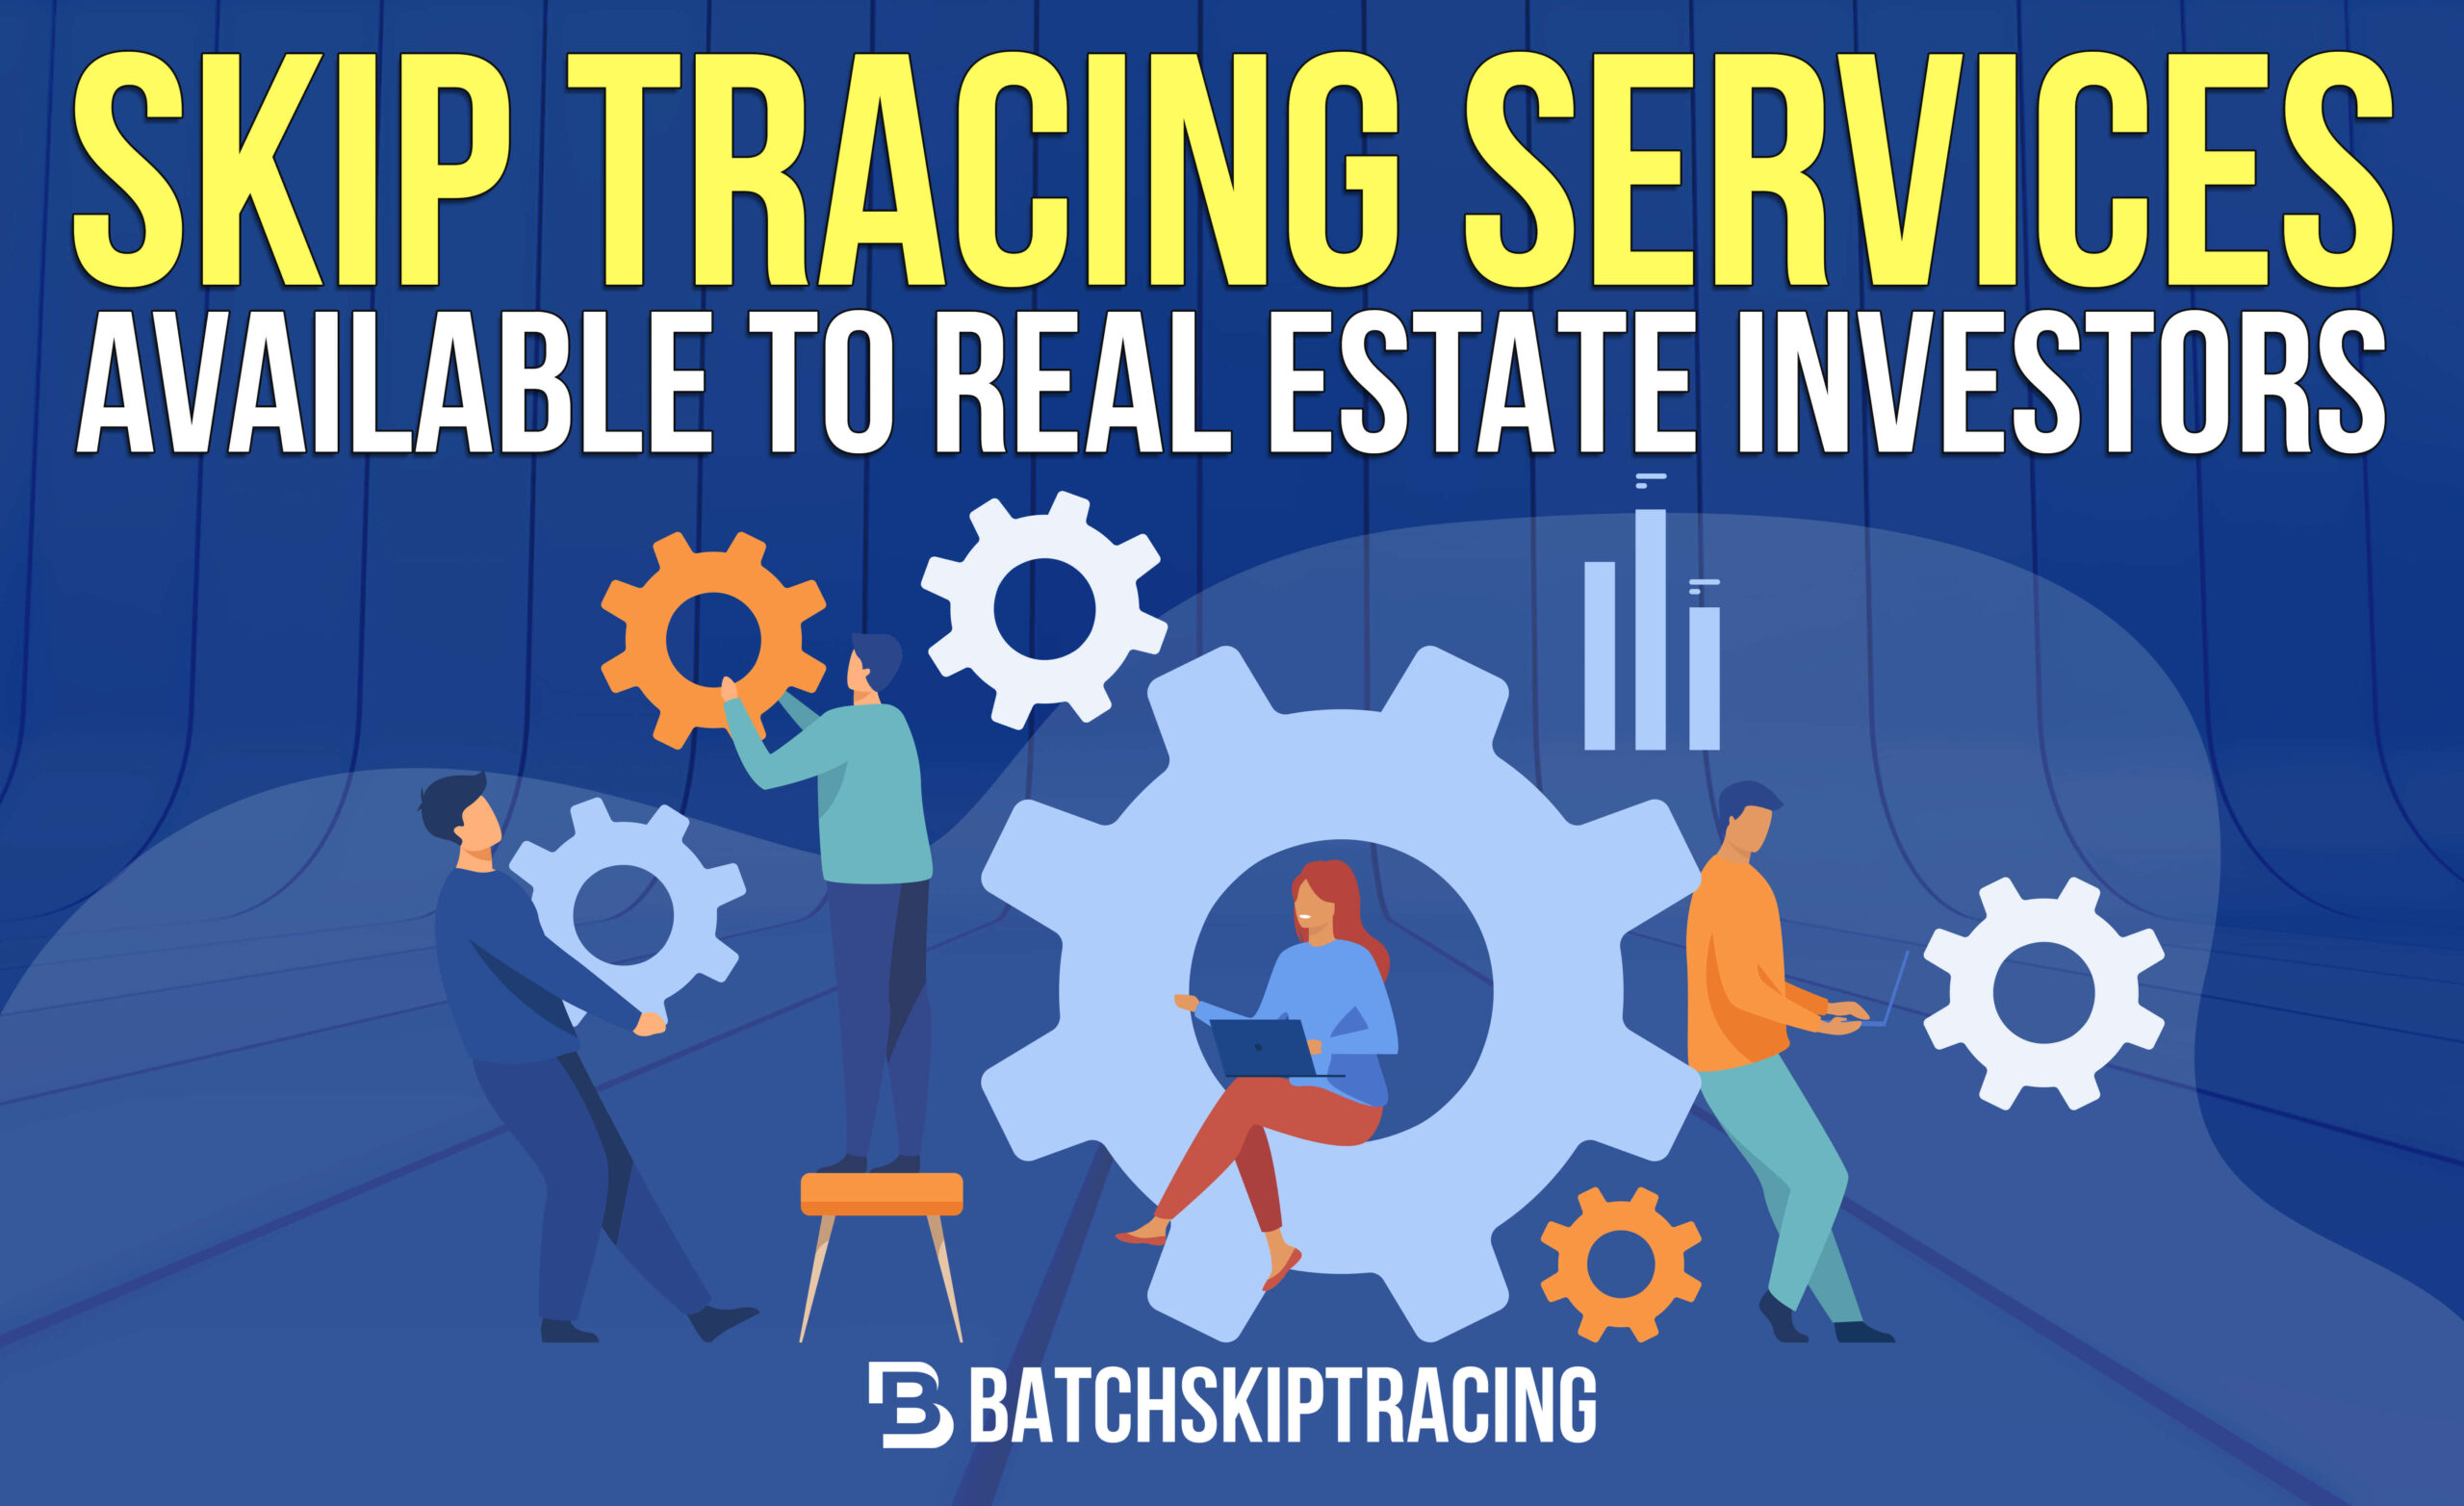 Skip Tracing Services Available to Real Estate Investors